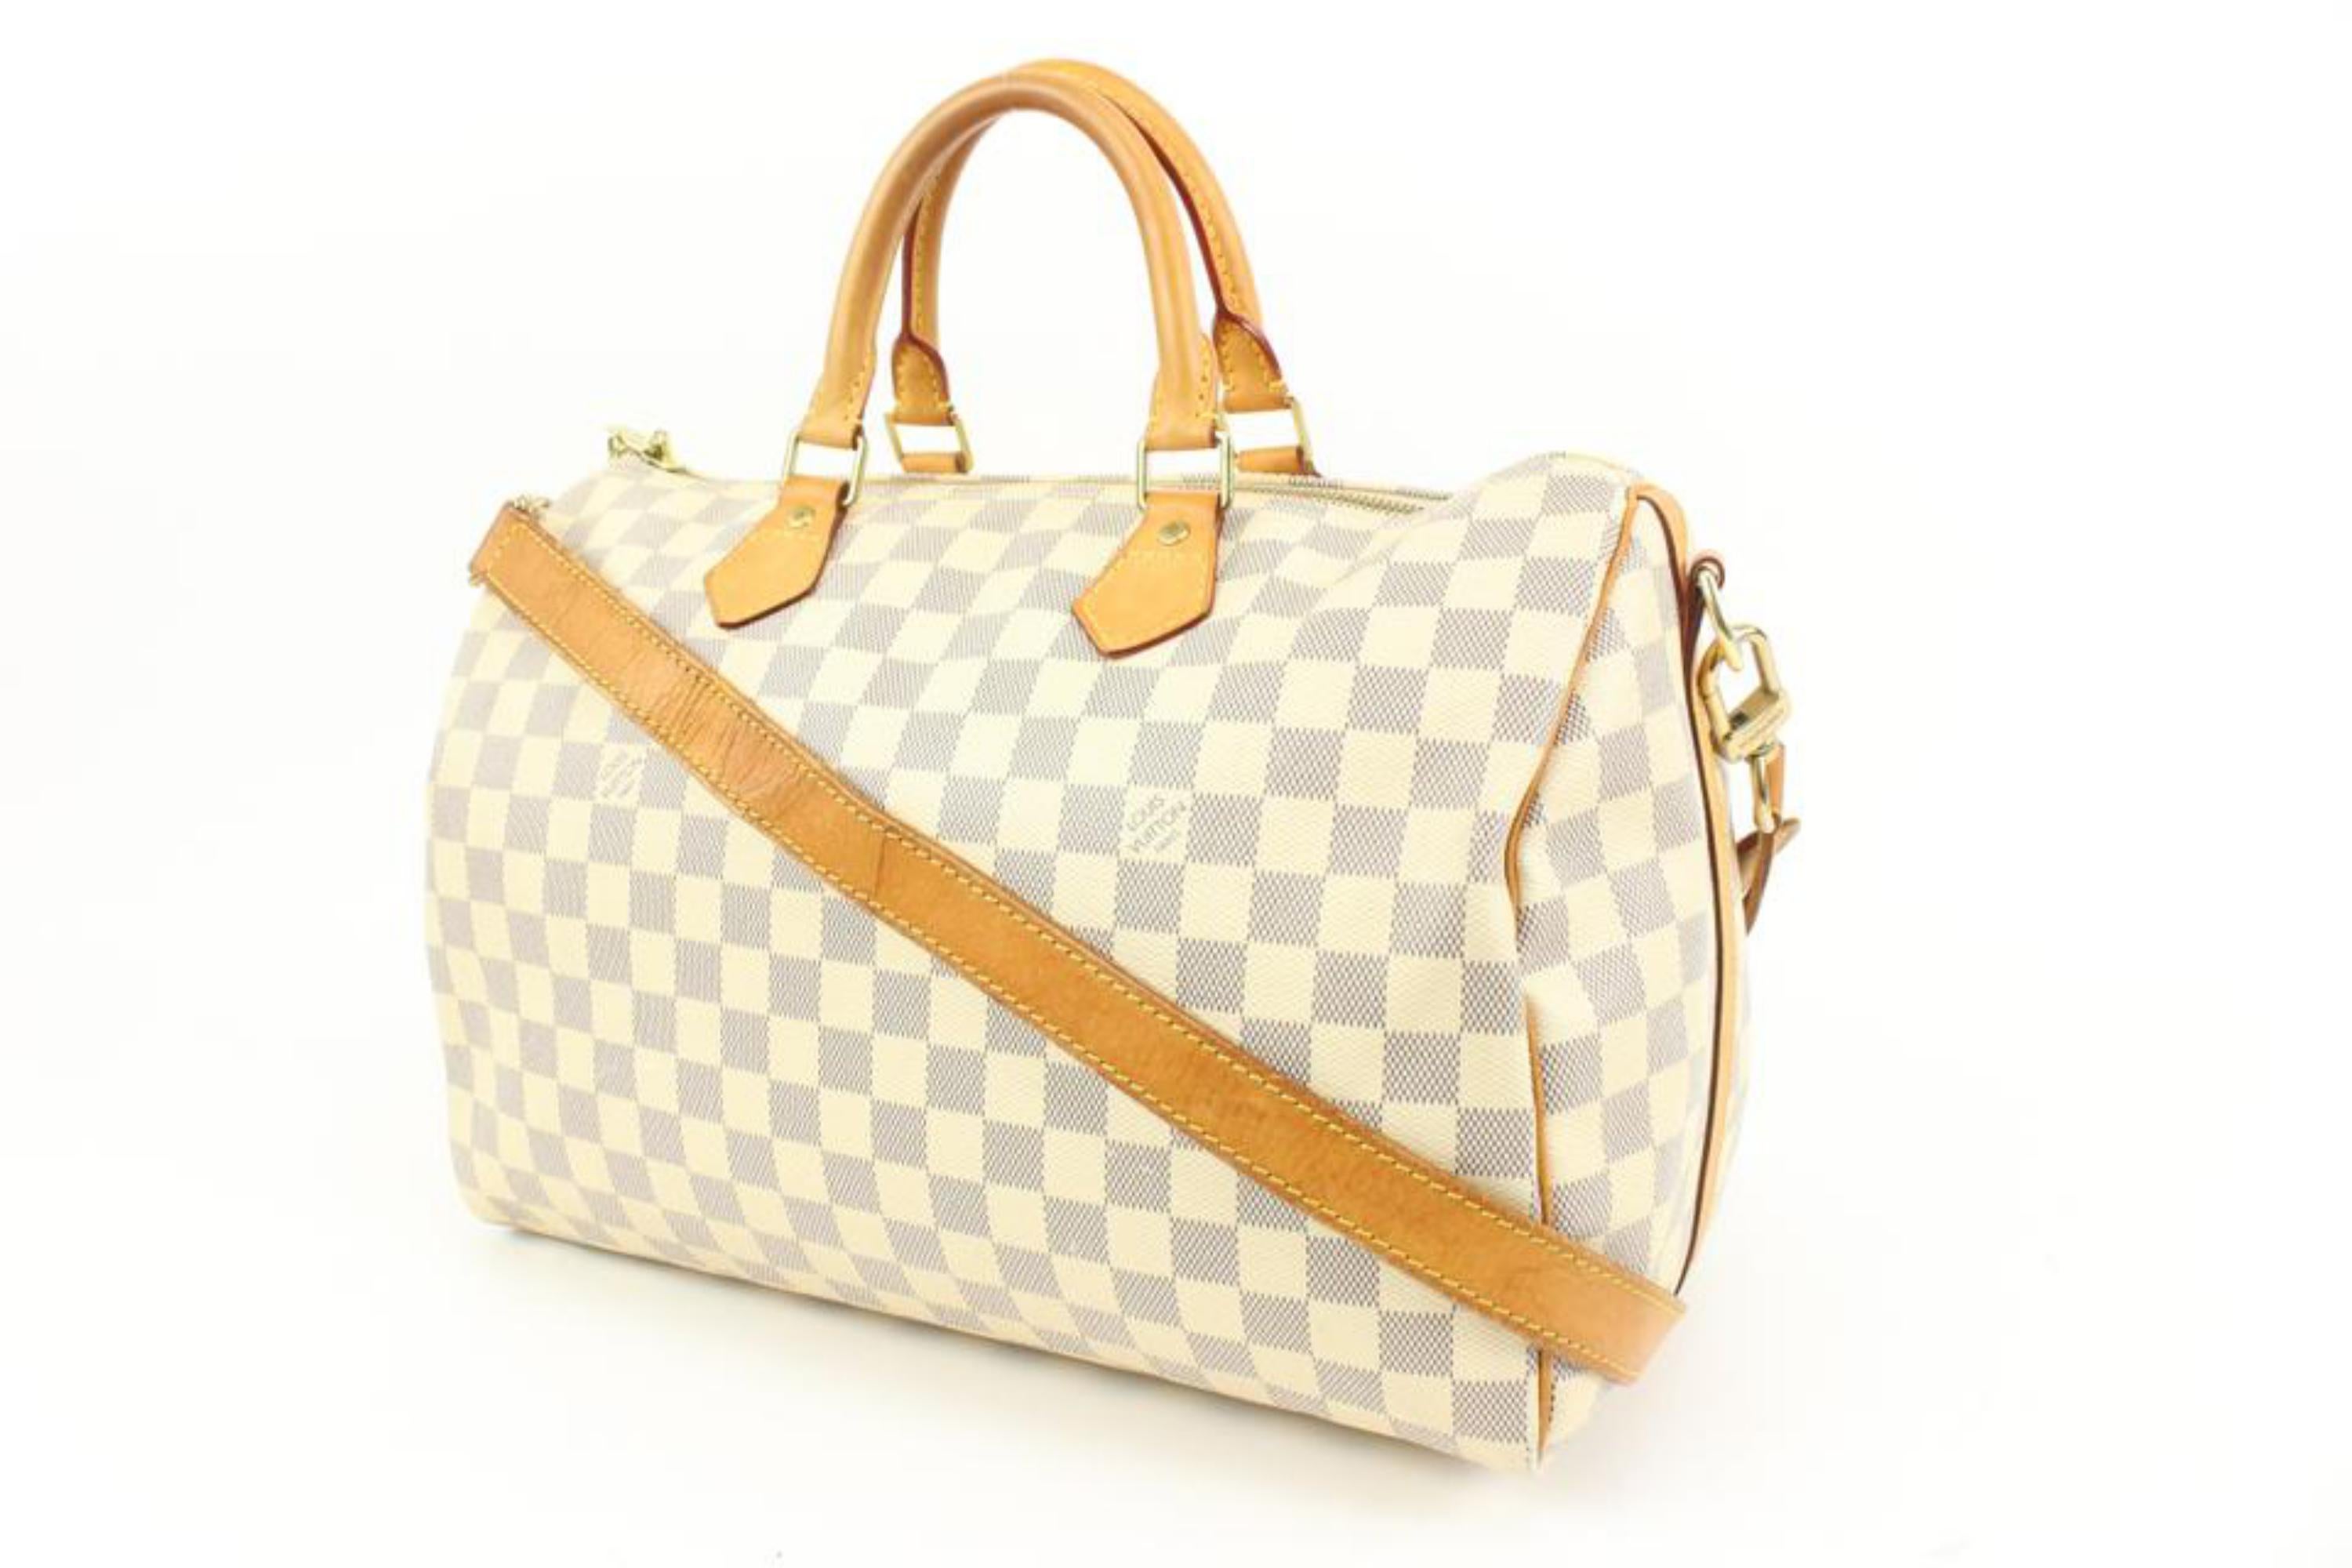 Louis Vuitton Damier Azur Speedy Bandouliere 35 Boston with Strap 10lk323s
Date Code/Serial Number: SP1113
Made In: France
Measurements: Length:  14